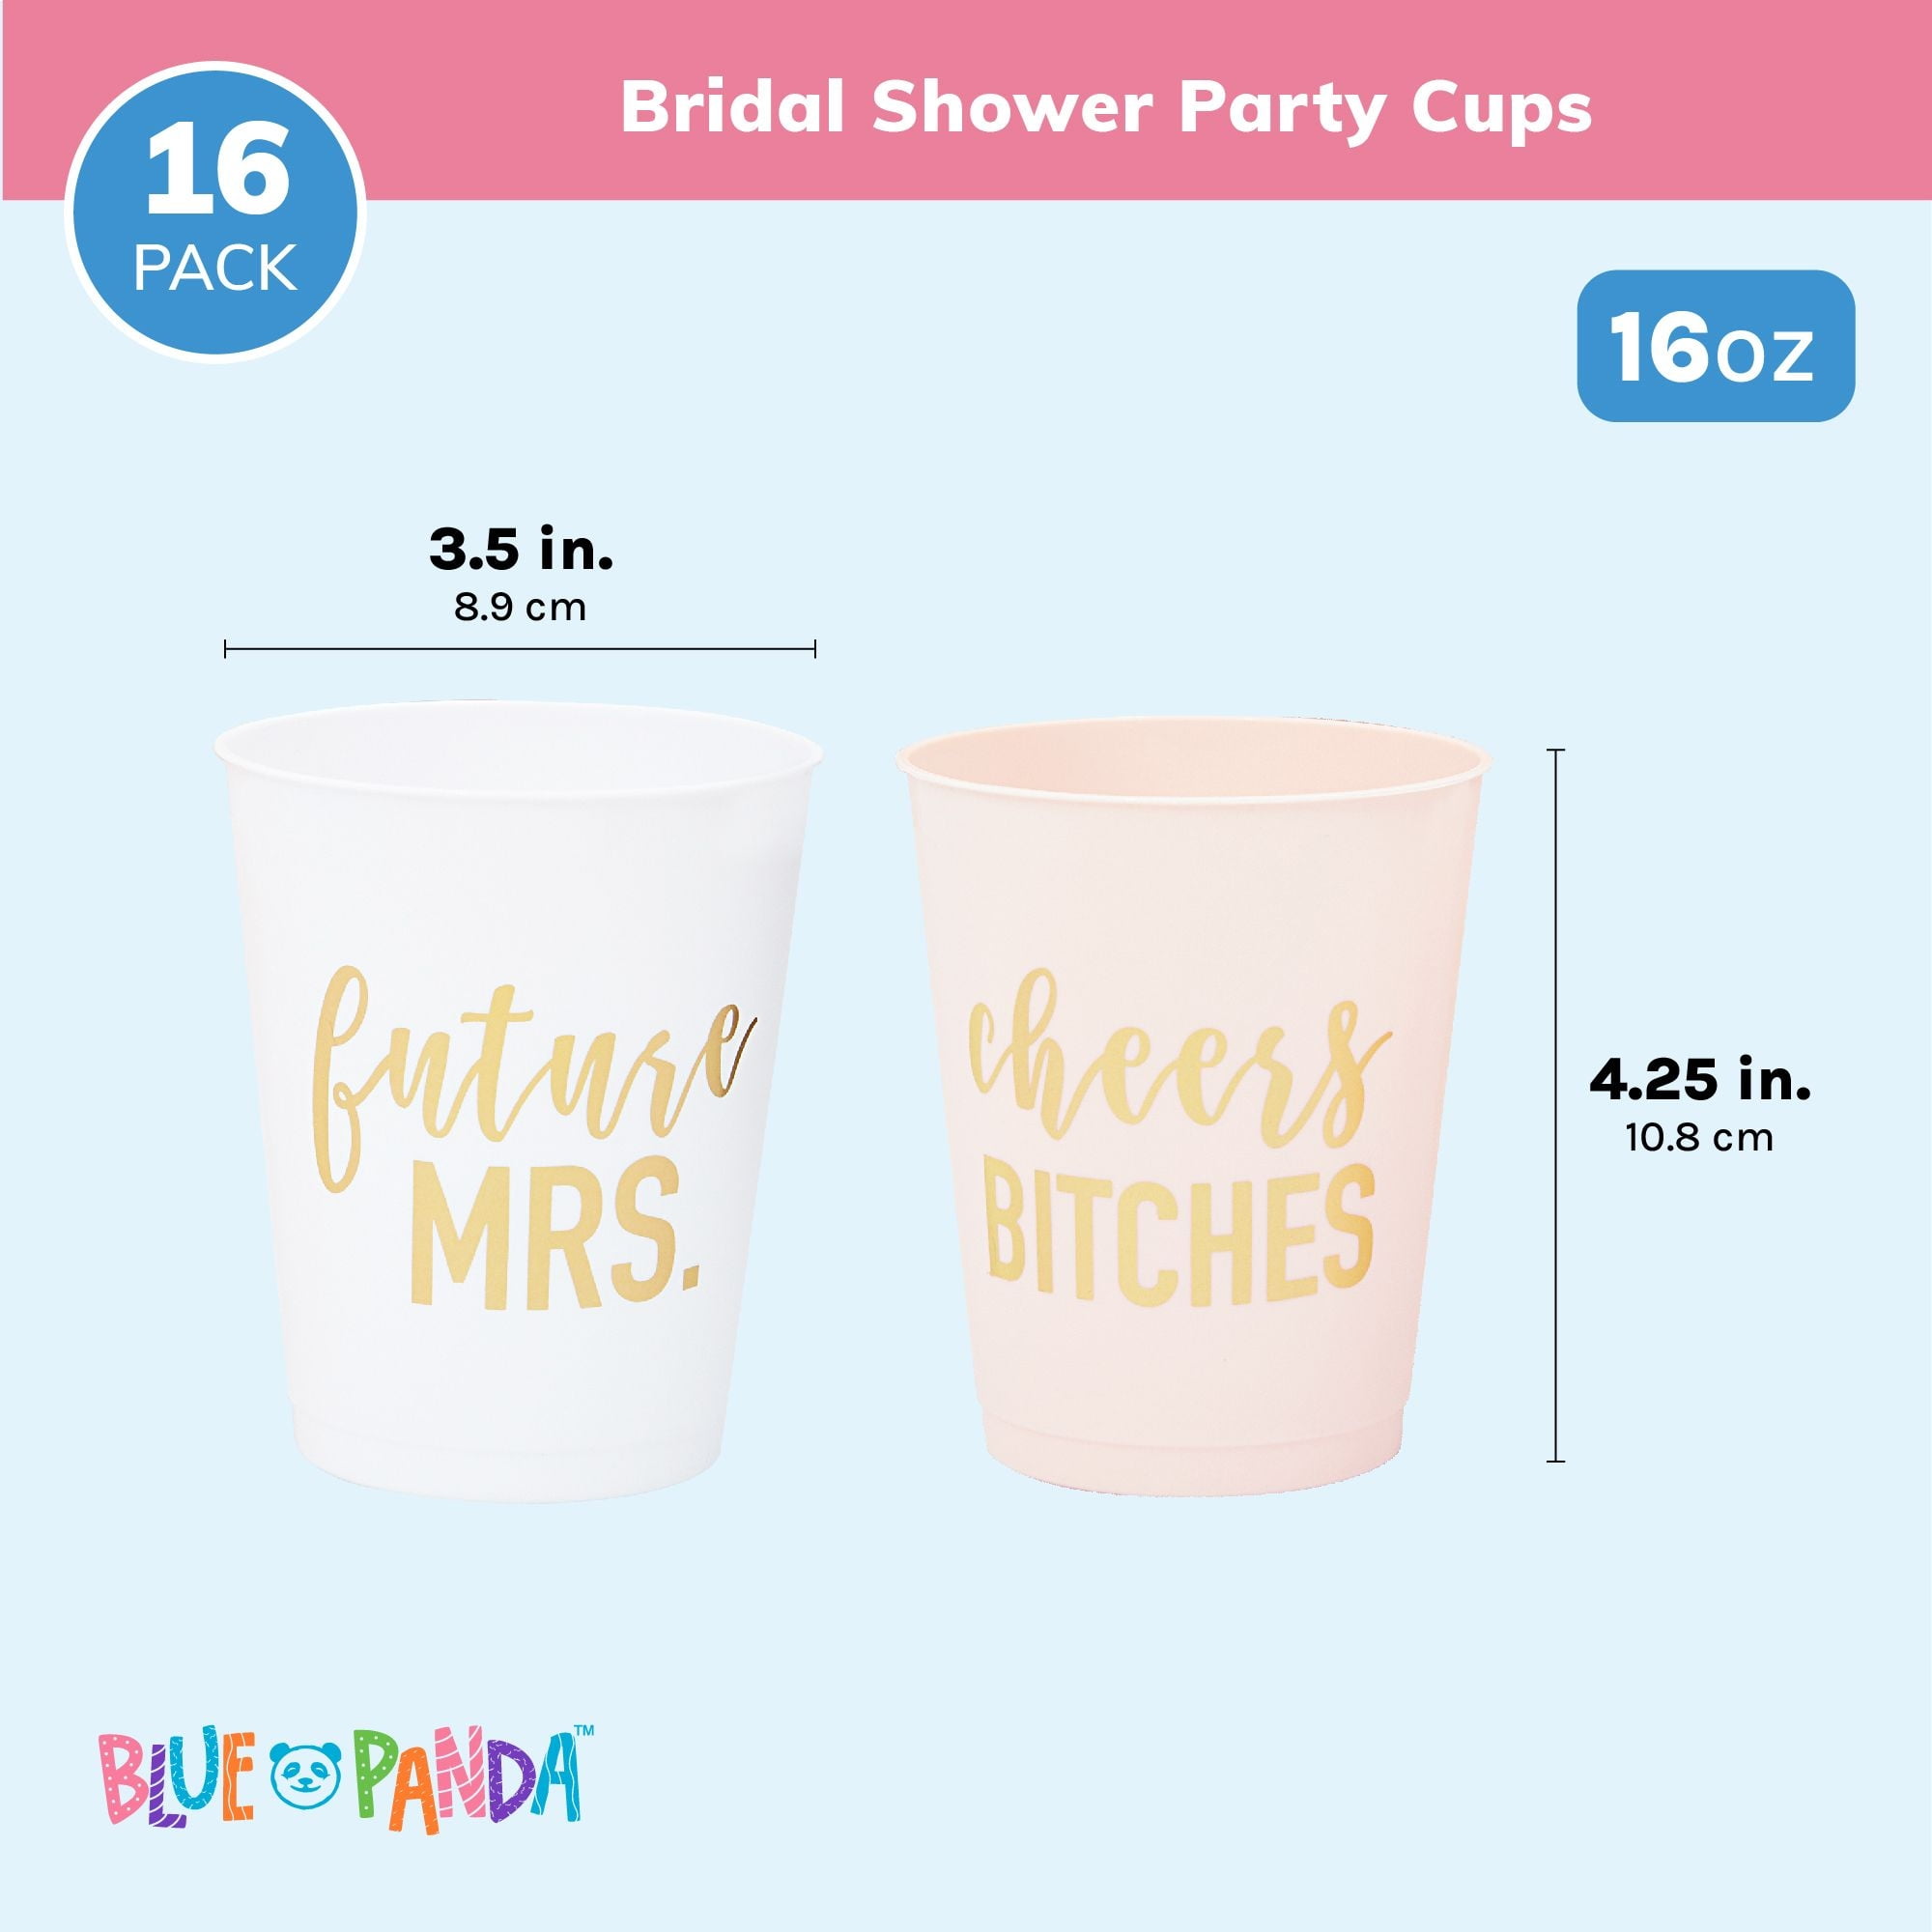 16-Pack Bachelorette Party Cups, Reusable Bride and Bridesmaid Cups for  Bridal Shower Party, Bachelorette Favors and Bridesmaid Gifts, Future Mrs +  Cheers (16 oz) 